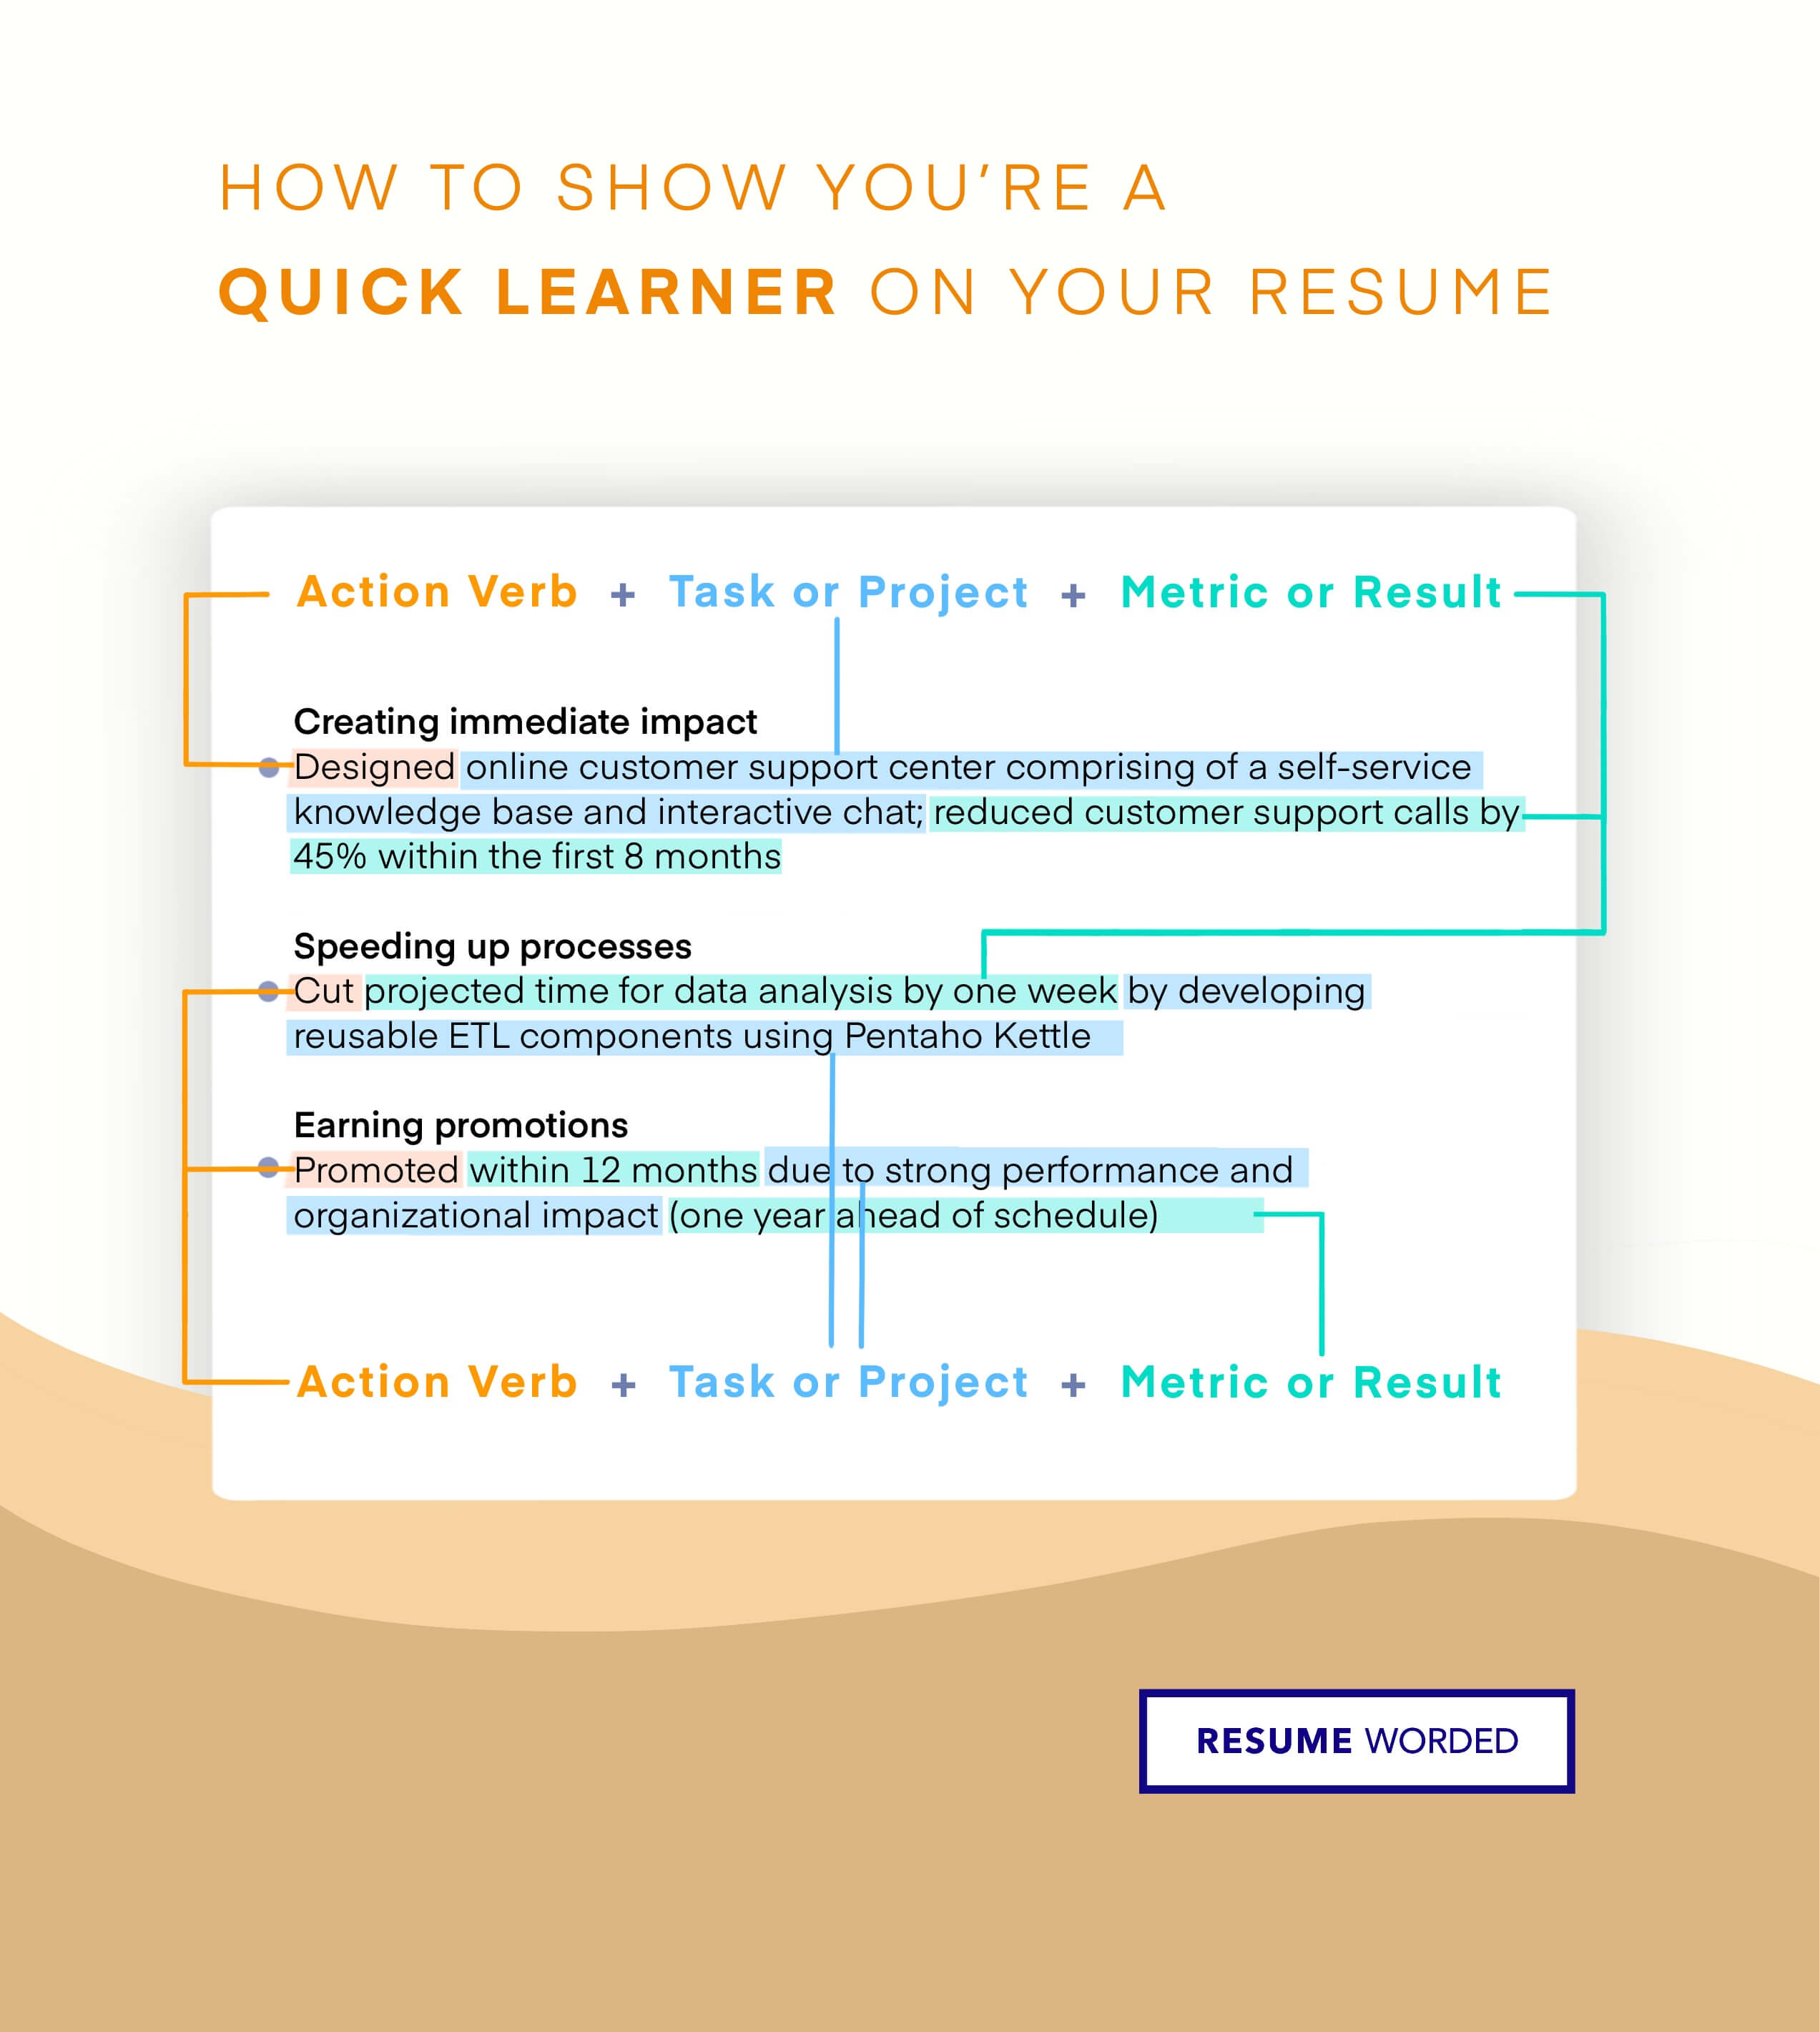 how to write fast learner on resume